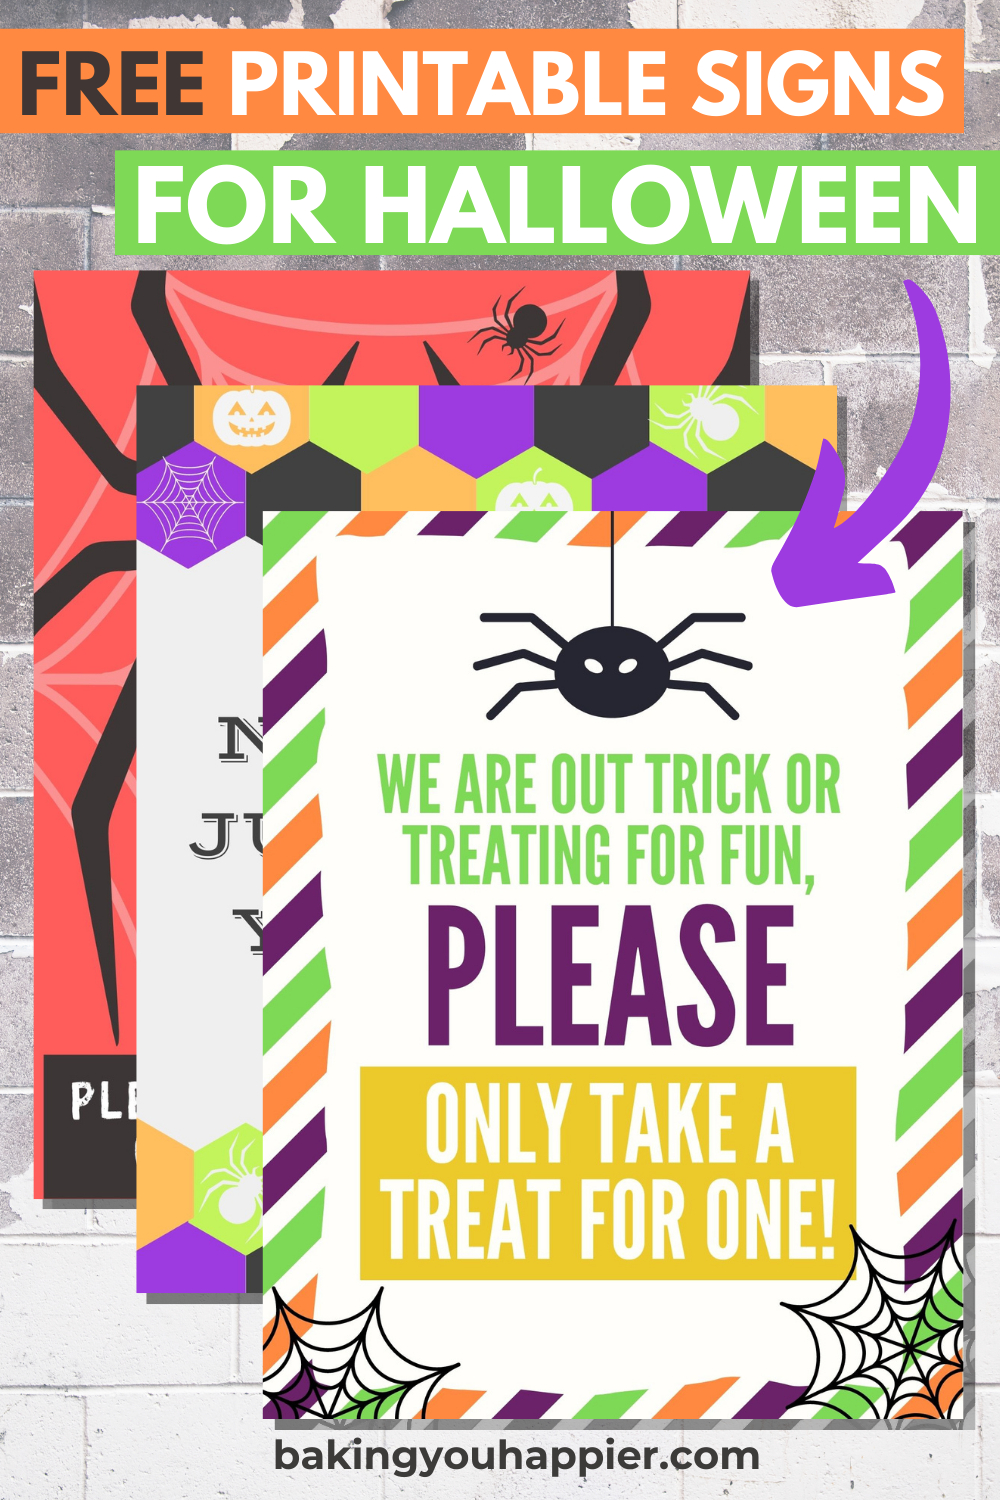 Please Take One Candy Halloween Signs  Baking You Happier destiné 1 Halloween 